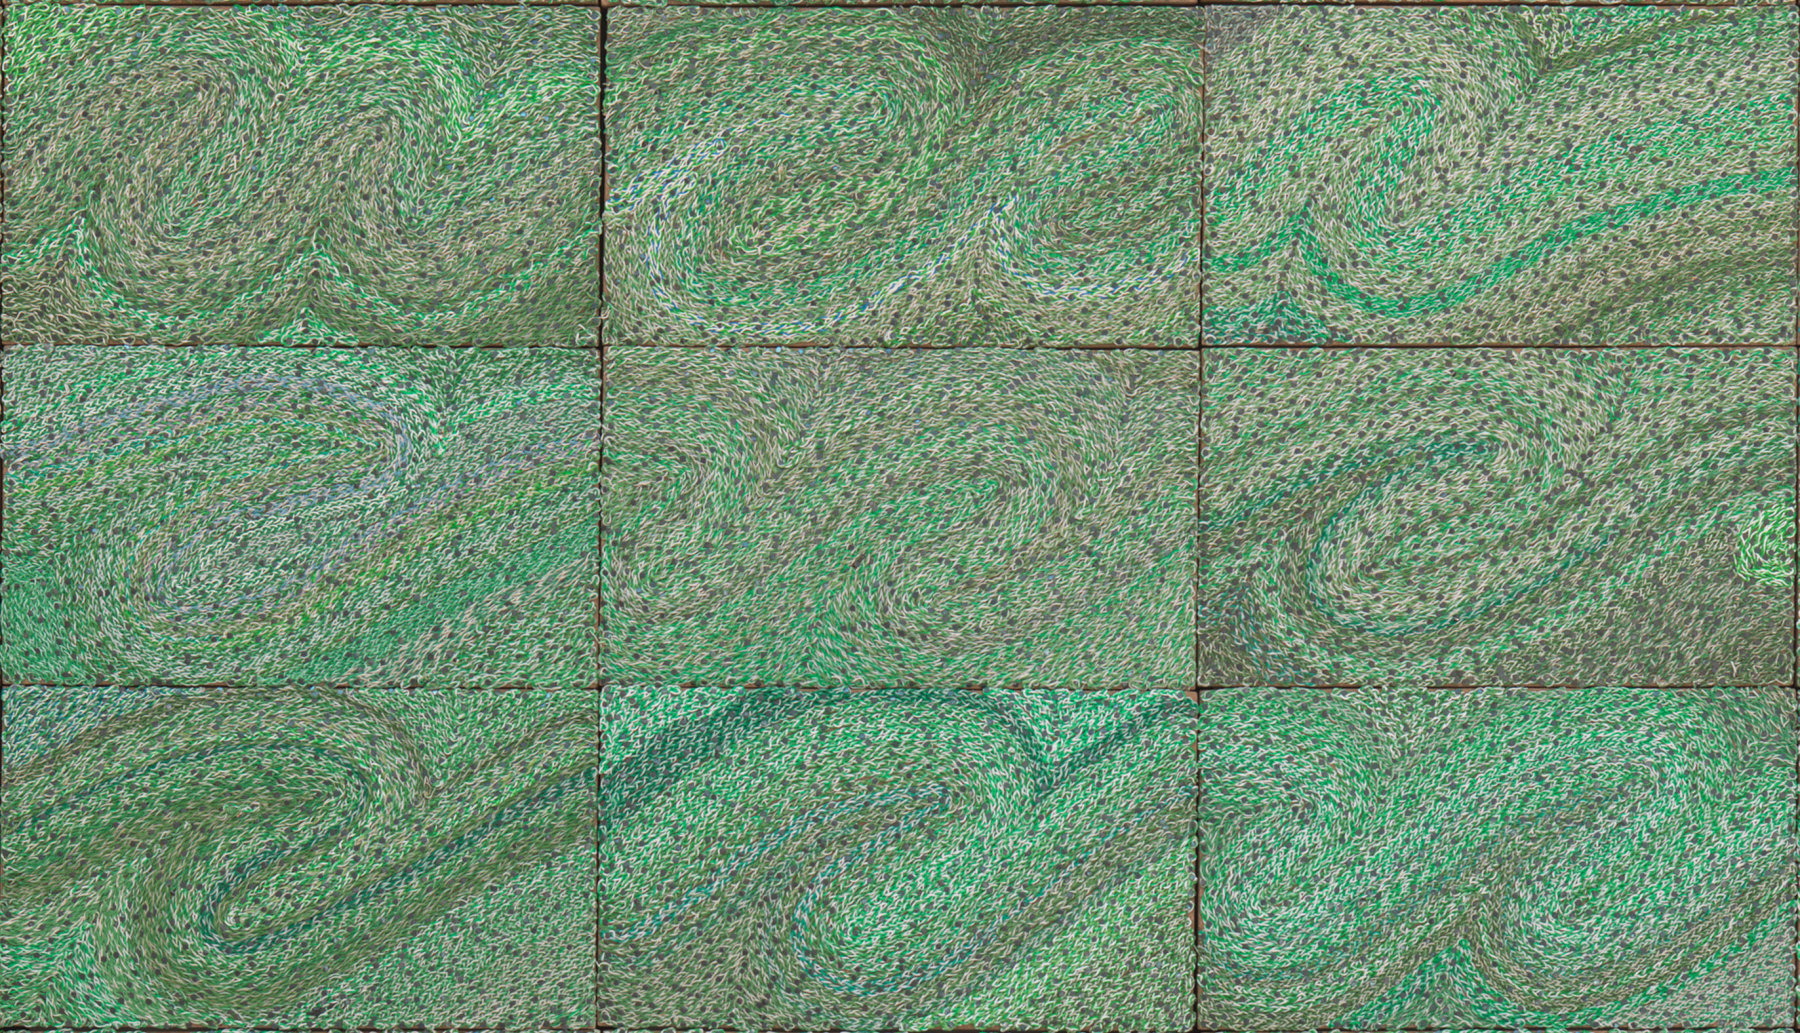 swirly, green surface composed of electrical components